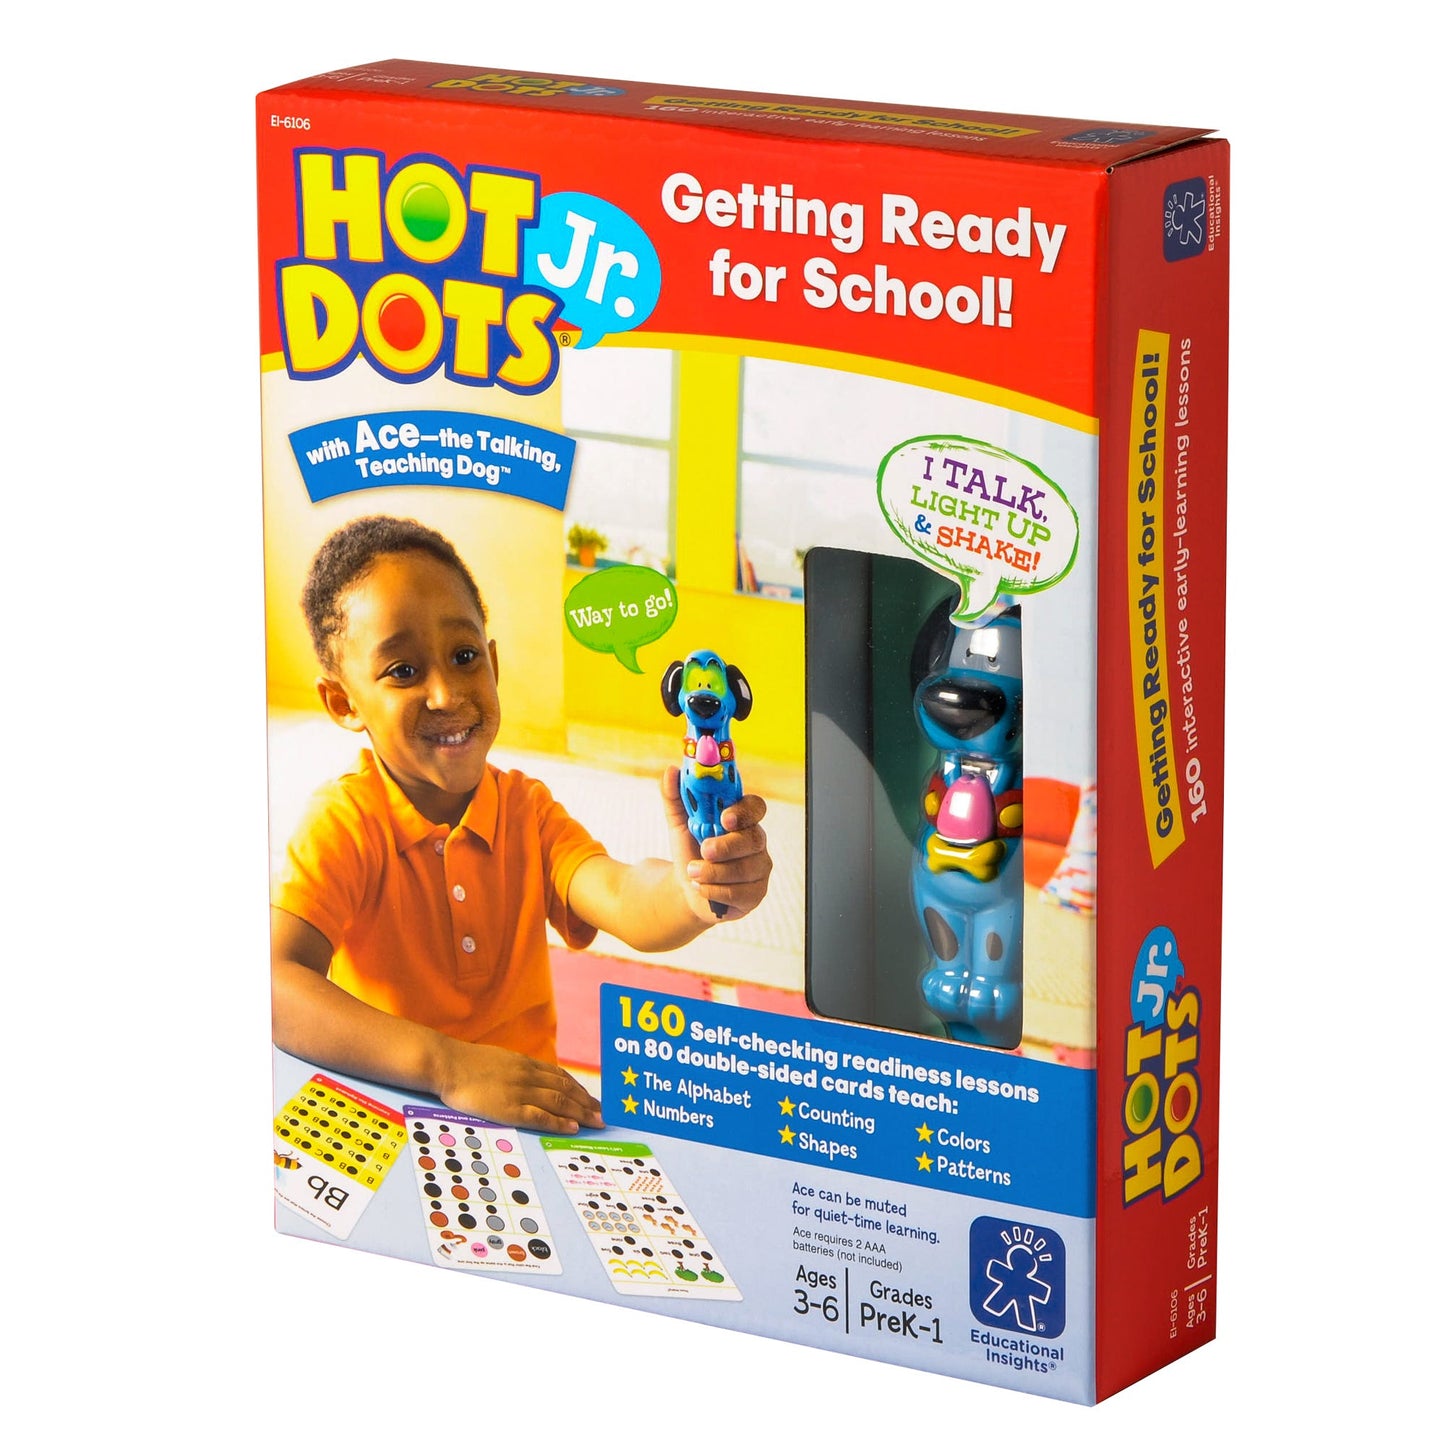 Hot Dots® Jr. Getting Ready for School!